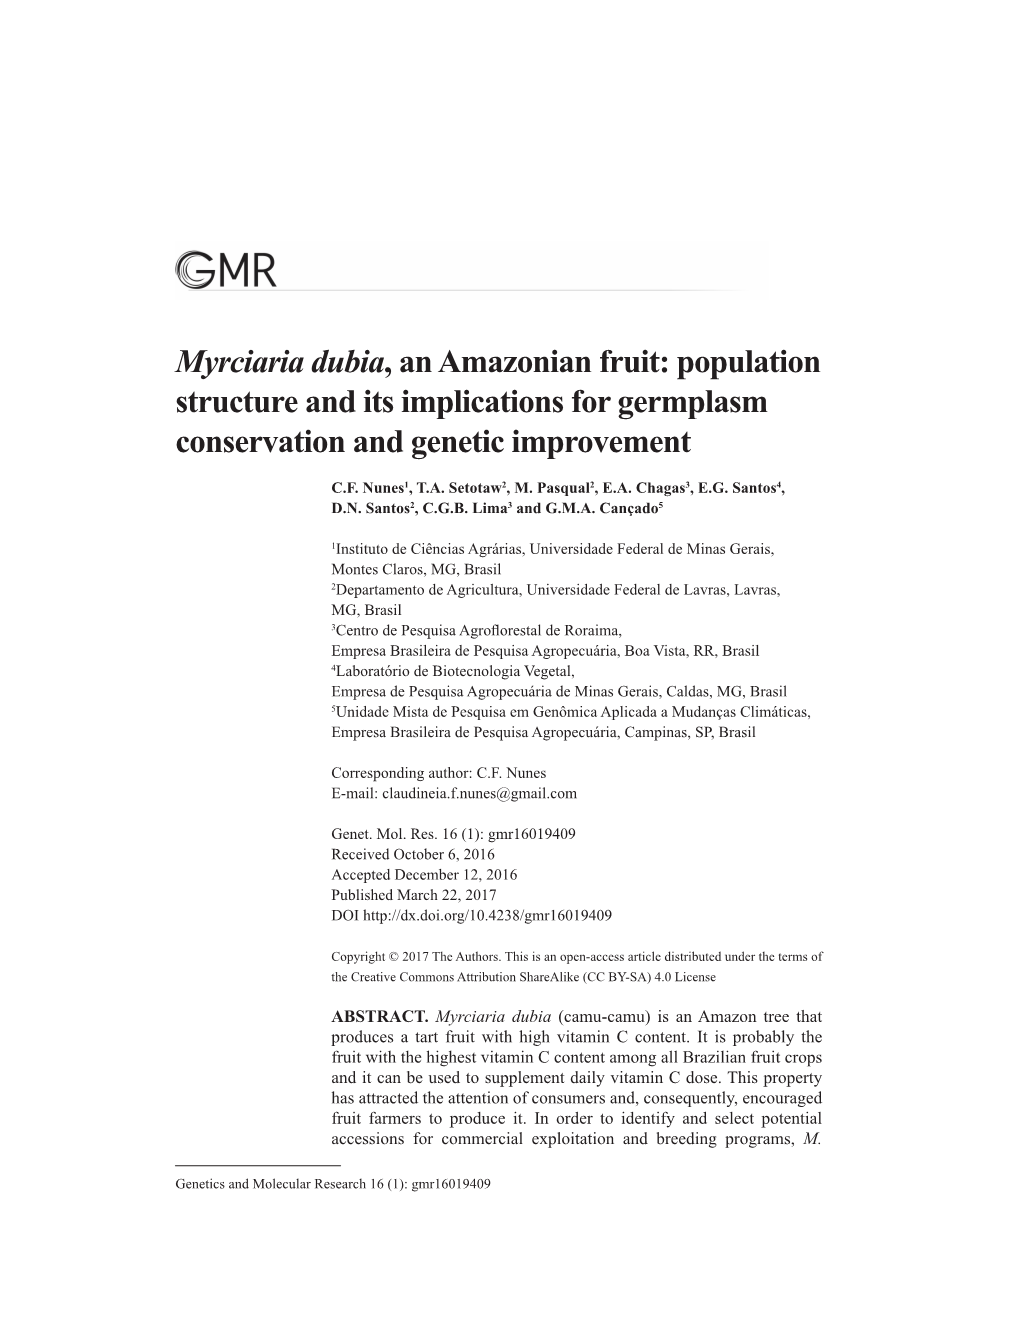 Myrciaria Dubia, an Amazonian Fruit: Population Structure and Its Implications for Germplasm Conservation and Genetic Improvement